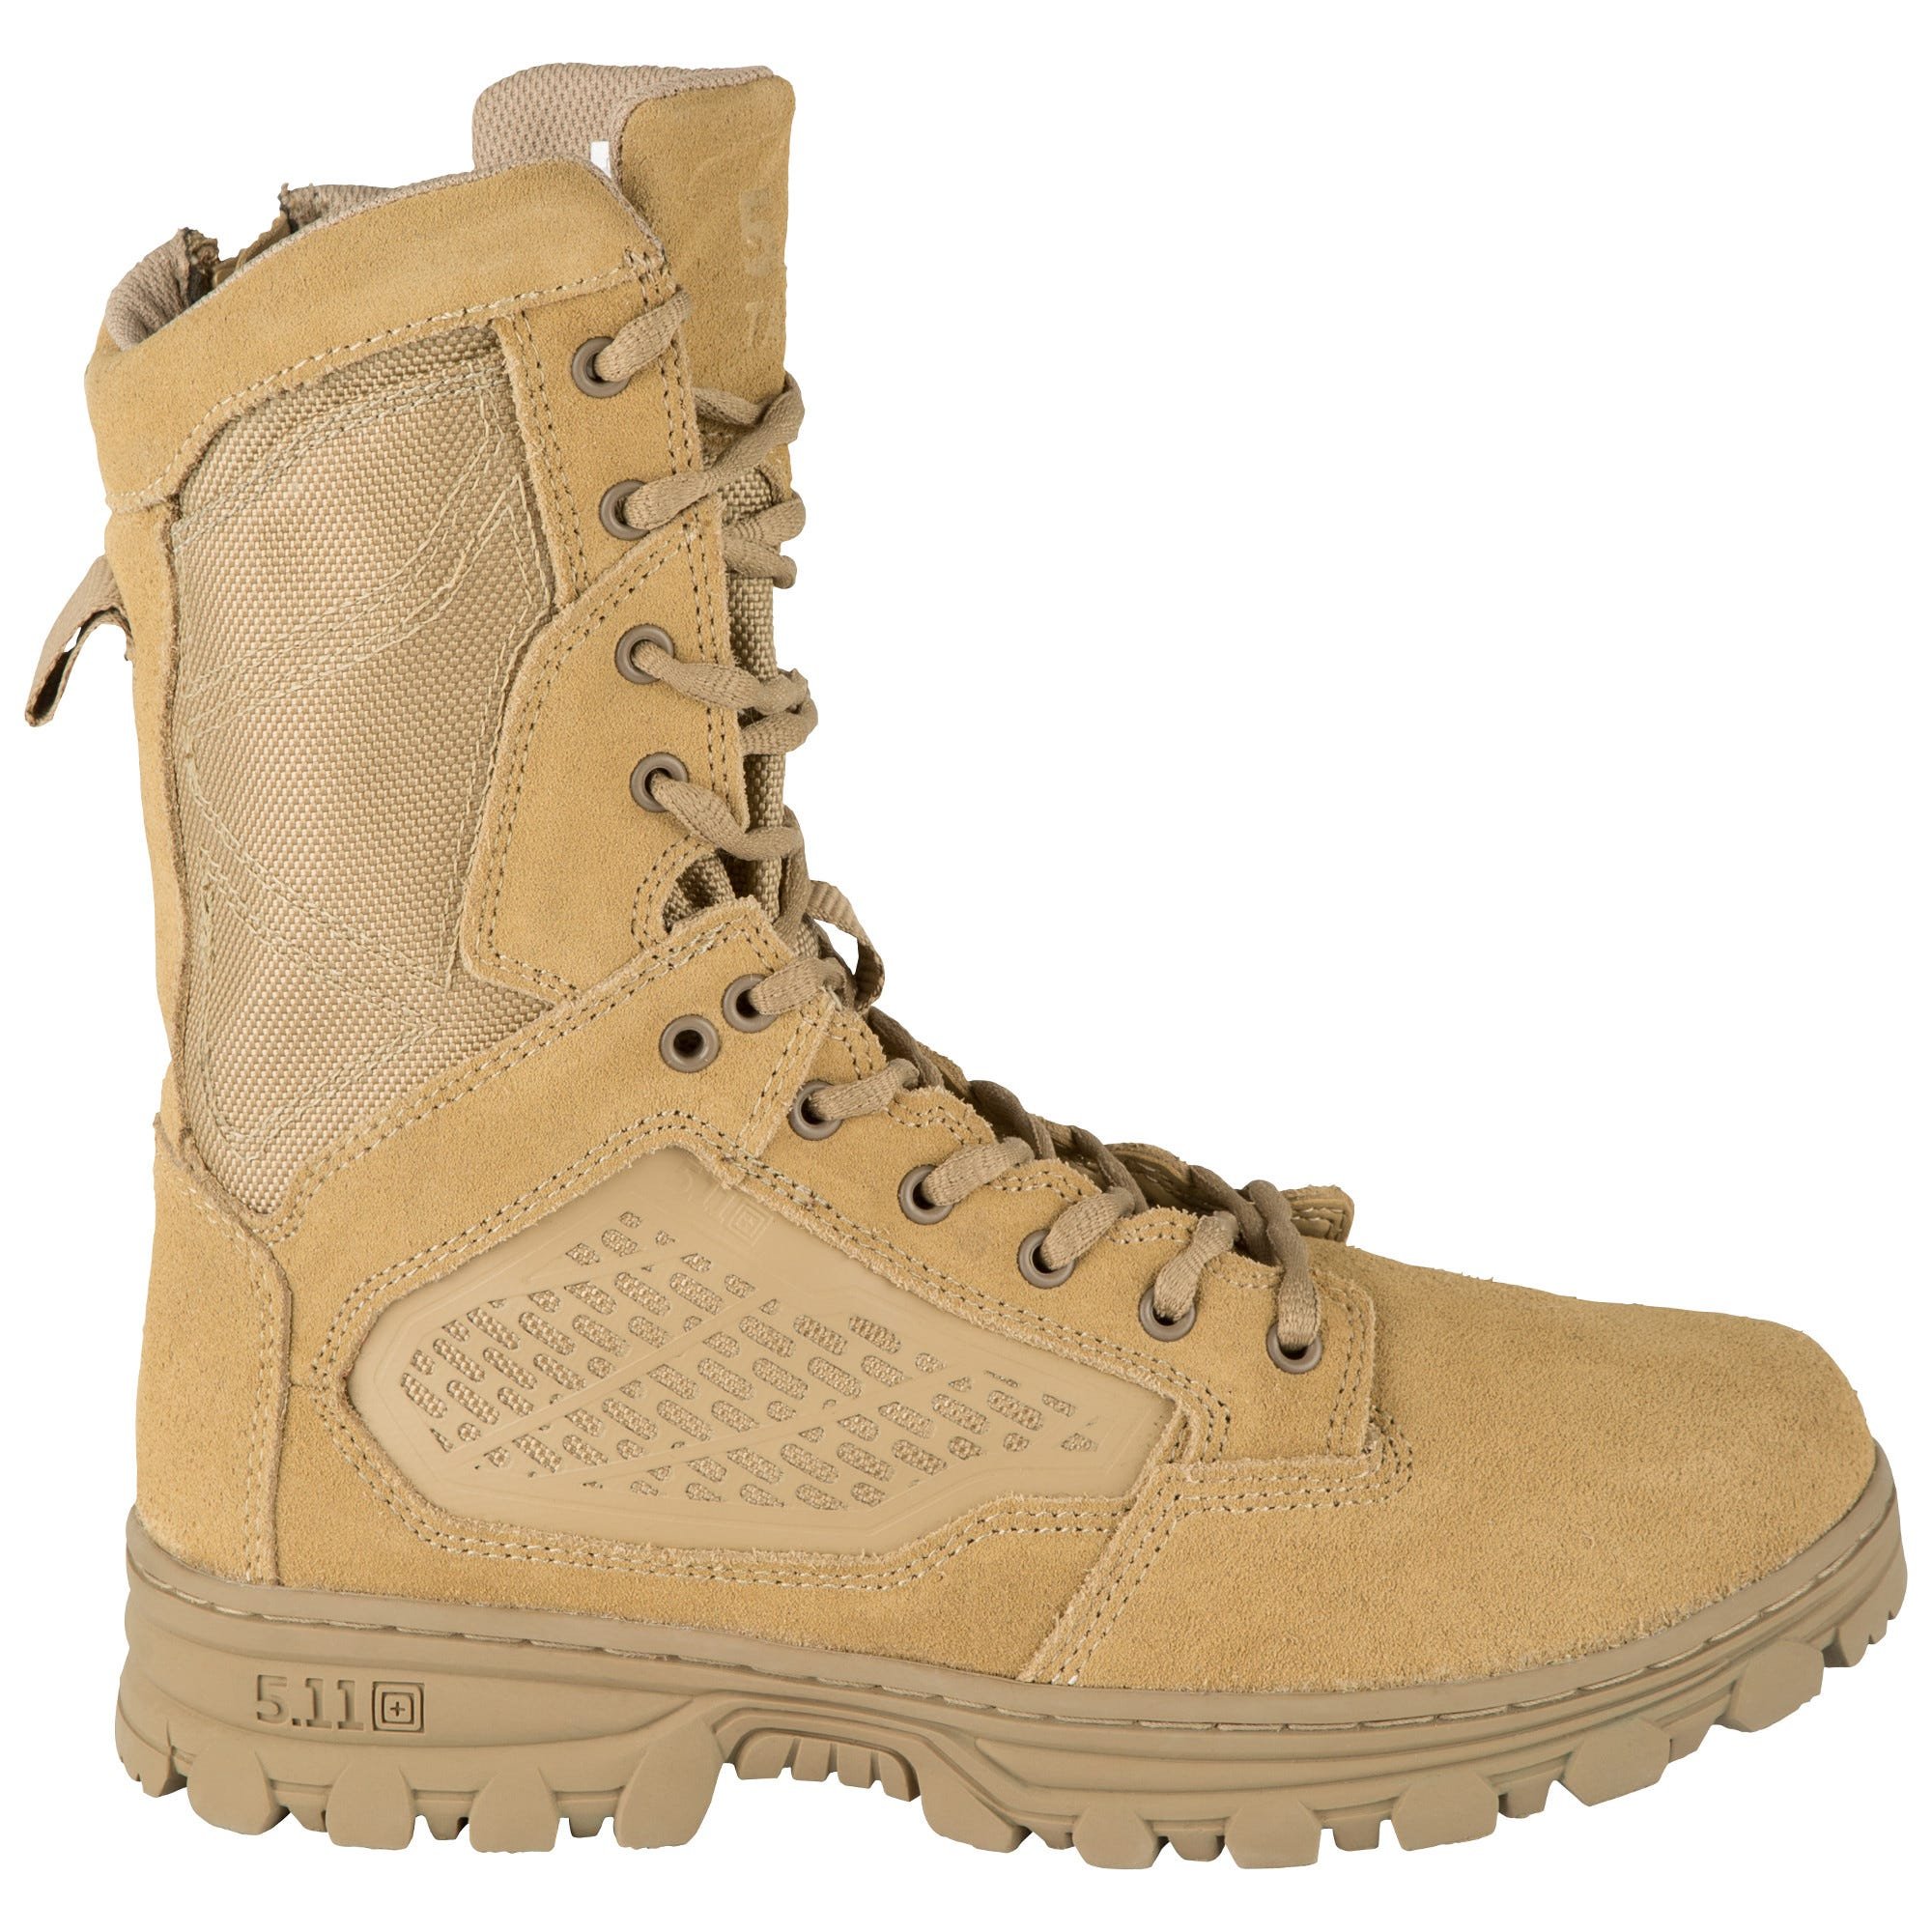 5.11 Work Gear EVO 8-Inch Waterproof Boots, Oil/Slip-Resistant, OrthoLite Insole, Coyote, 6/Regular, Style 12347 - image 3 of 4